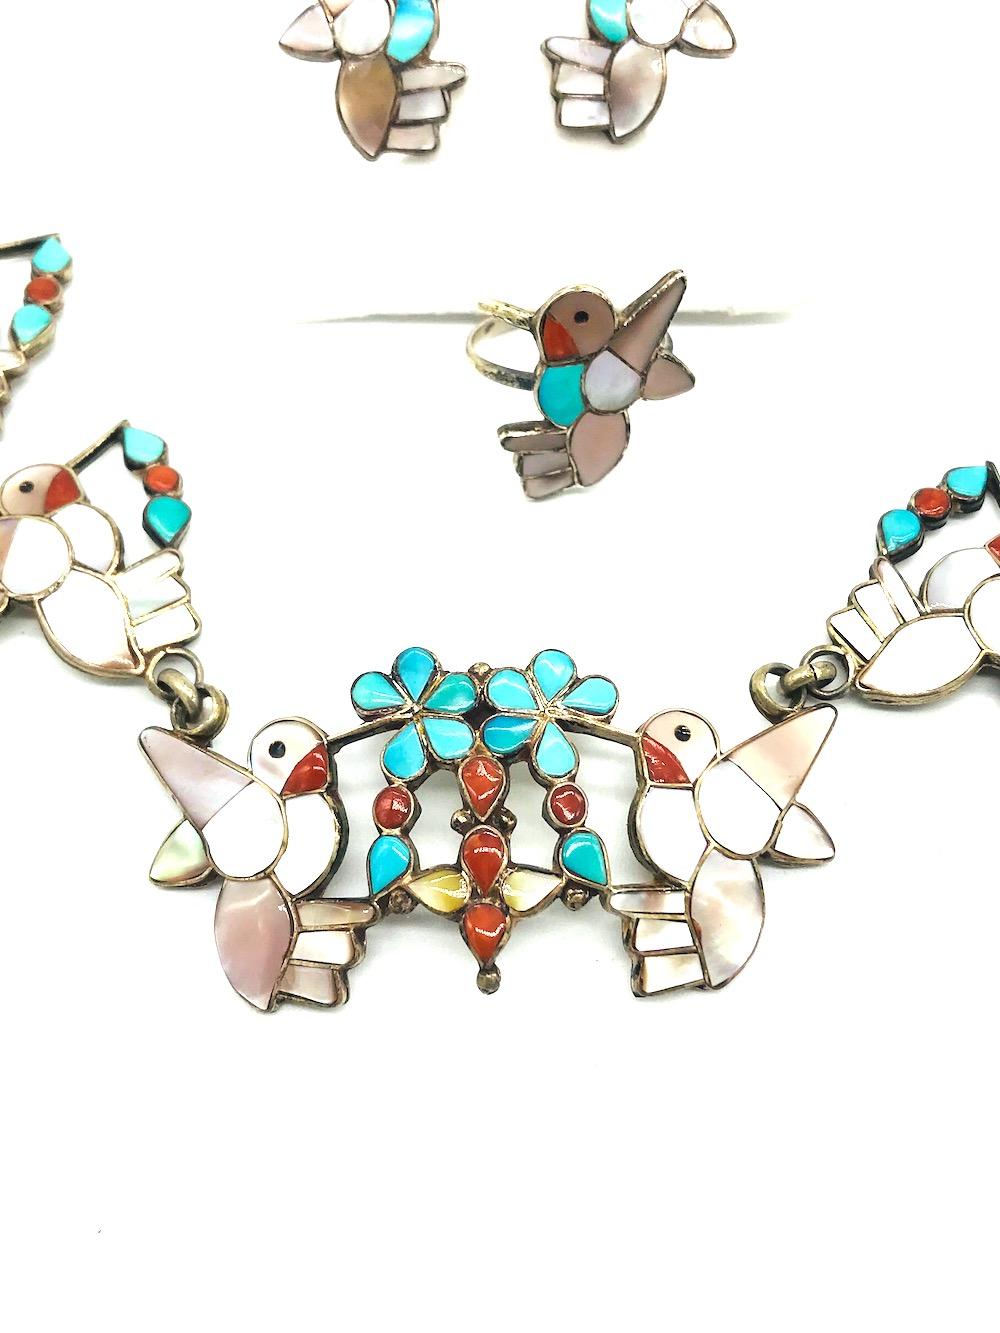 Artist Hummingbirds, Earring Necklace Ring Set, Turquoise and Mother of Pearl 1